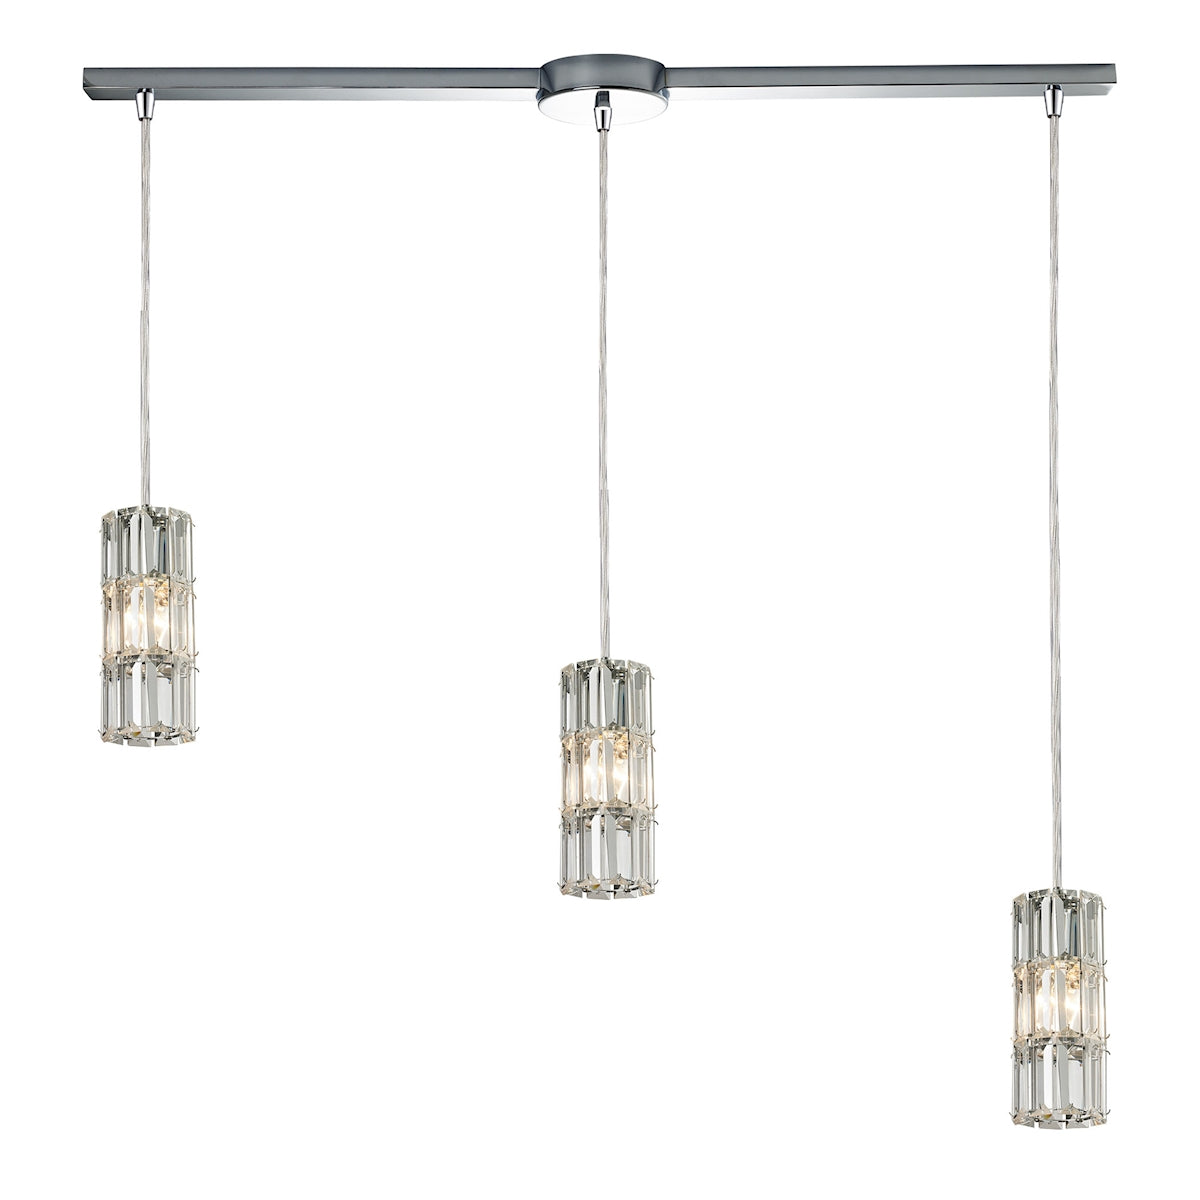 ELK Lighting 31486/3L Cynthia 3-Light Linear Pendant Fixture in Polished Chrome with Crystal